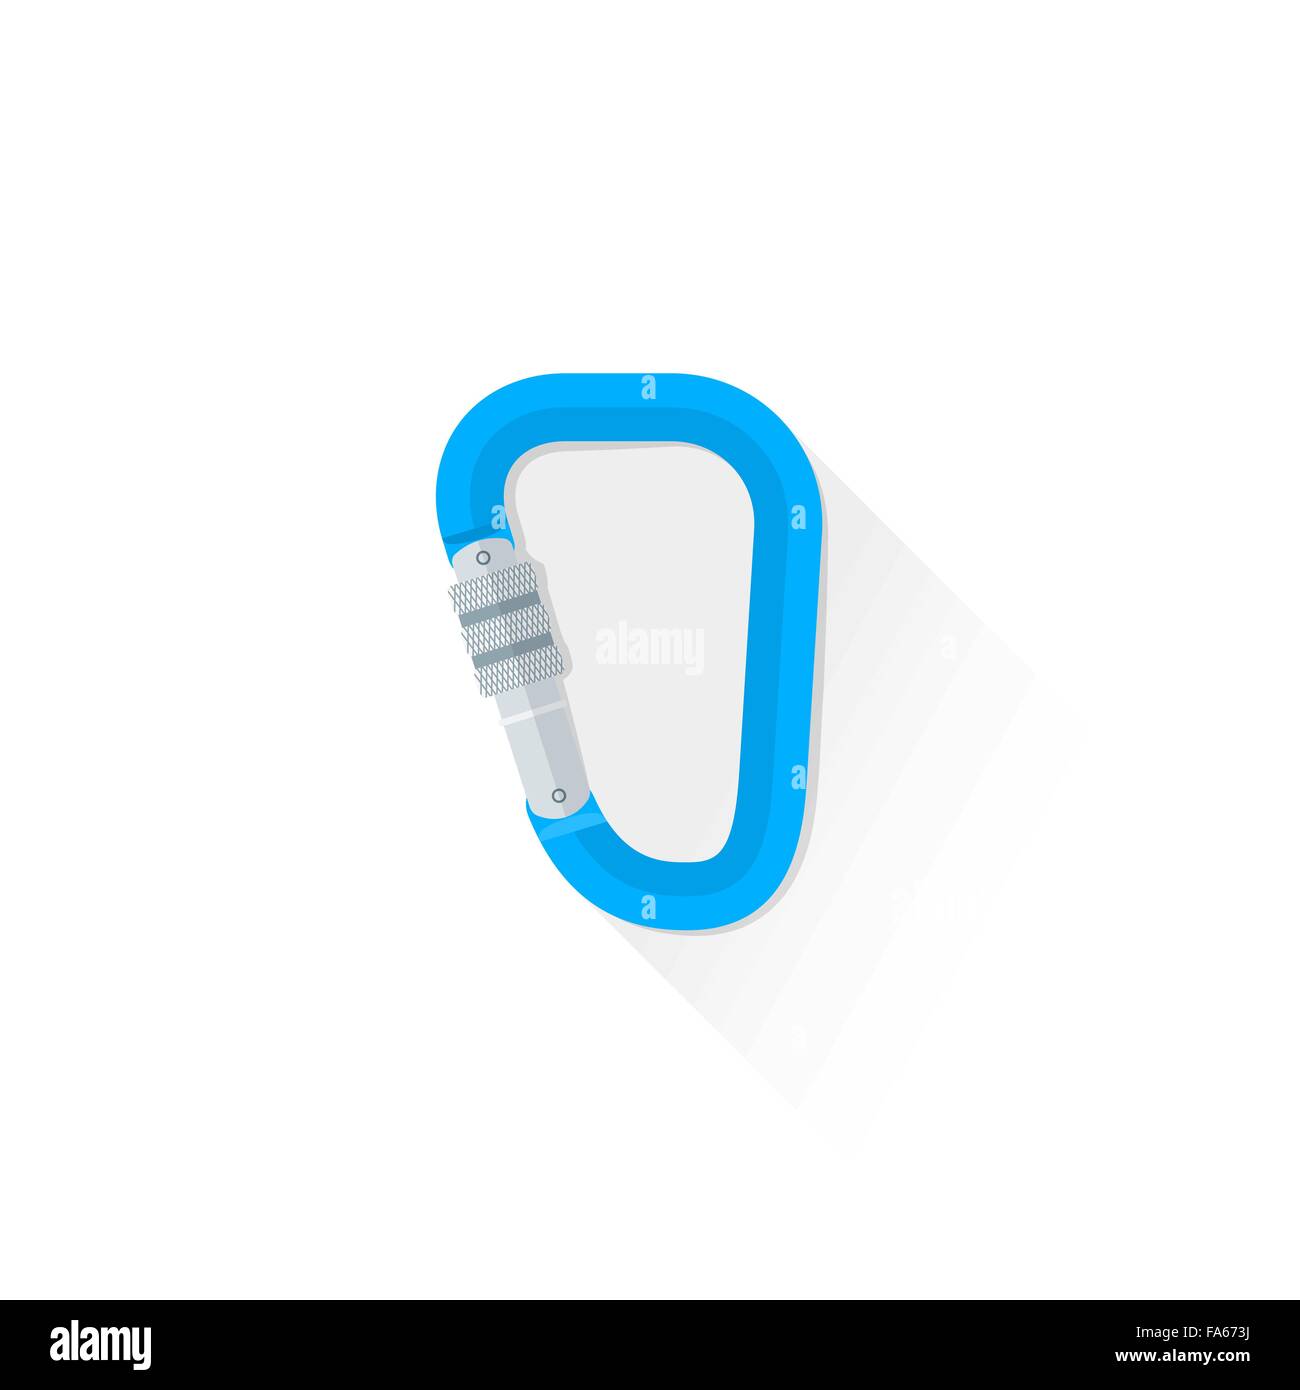 Carabiner Cliparts Stock Vector and Royalty Free Carabiner Illustrations